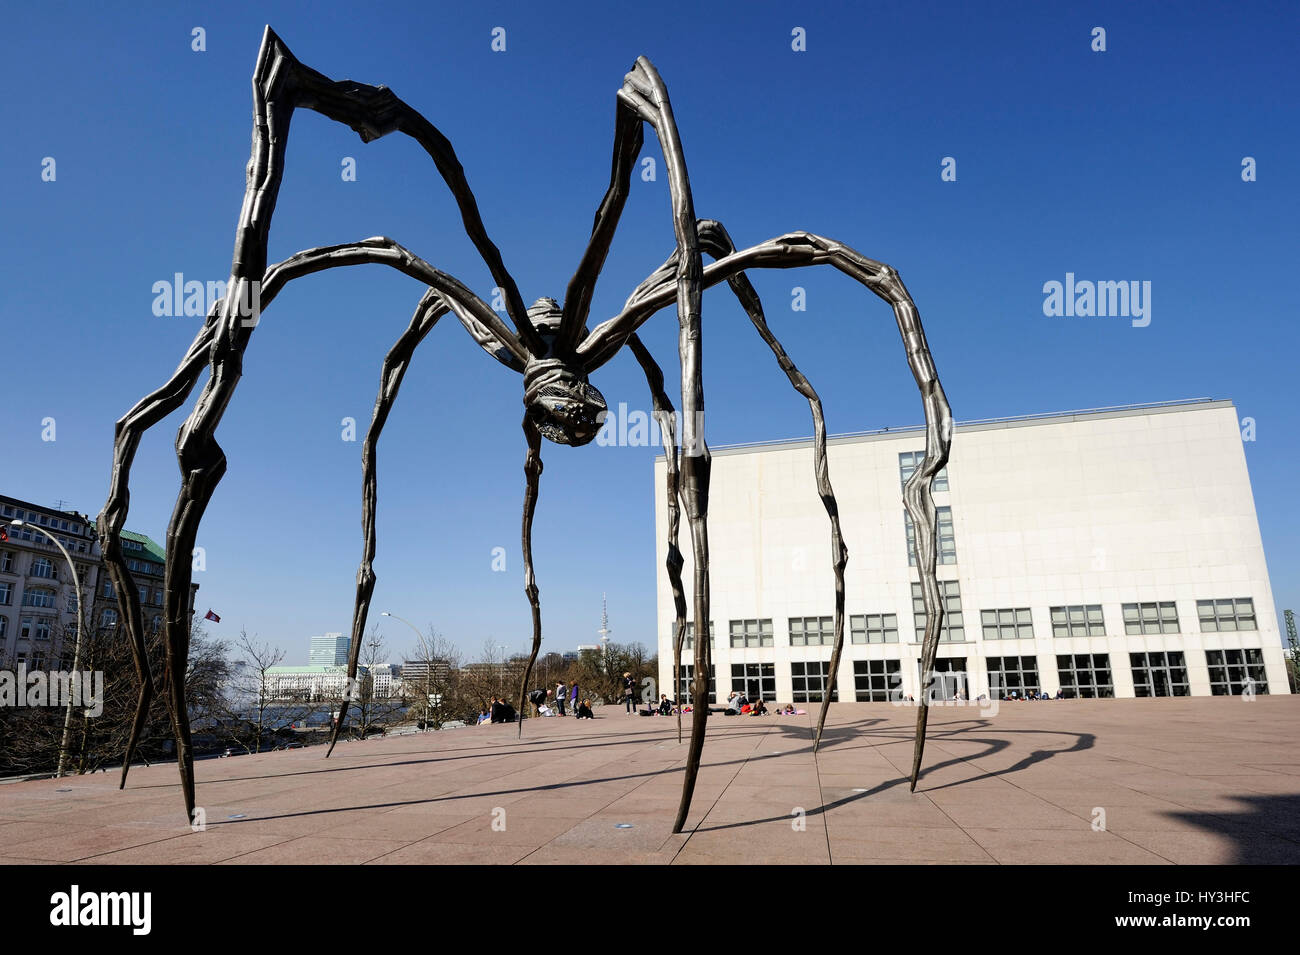 Gallery of the present and sculpture Maman of Louise Bourgeois in Hamburg, Germany, Europe, Galerie der Gegenwart und Skulptur Maman von Louise Bourge Stock Photo